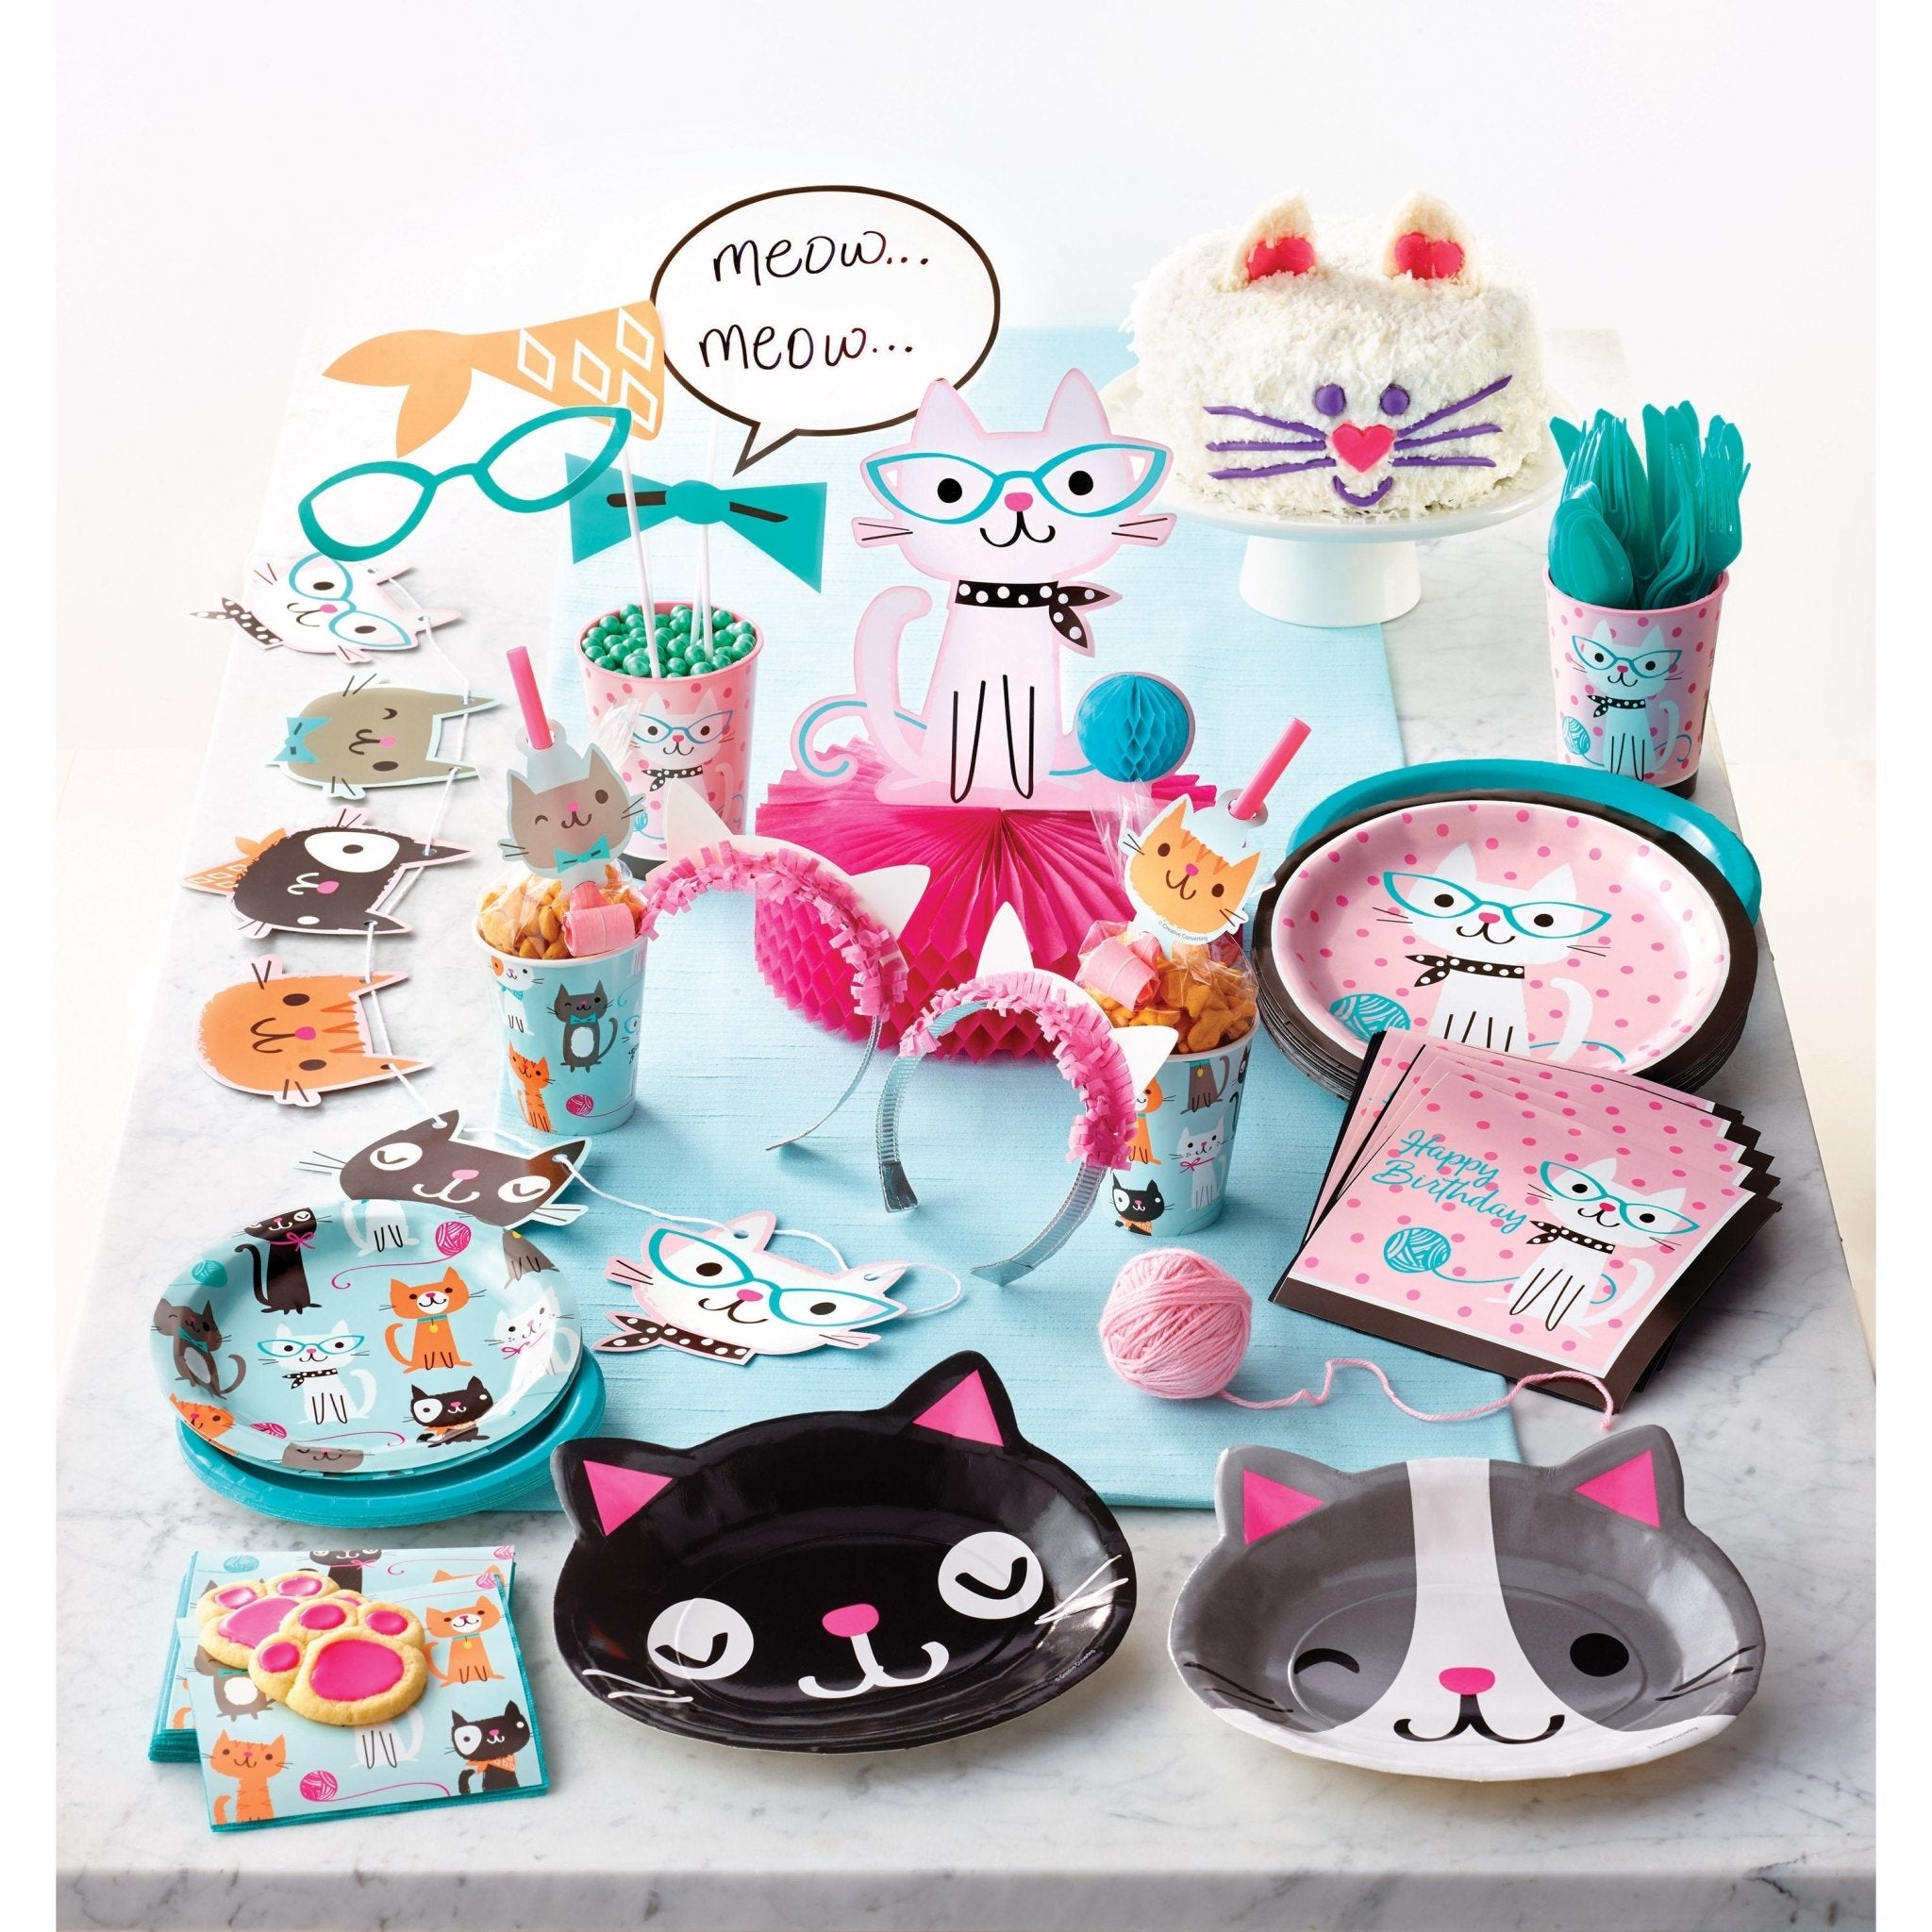 Cat Themed Party Decorations - Stesha Party - birthday girl, cat